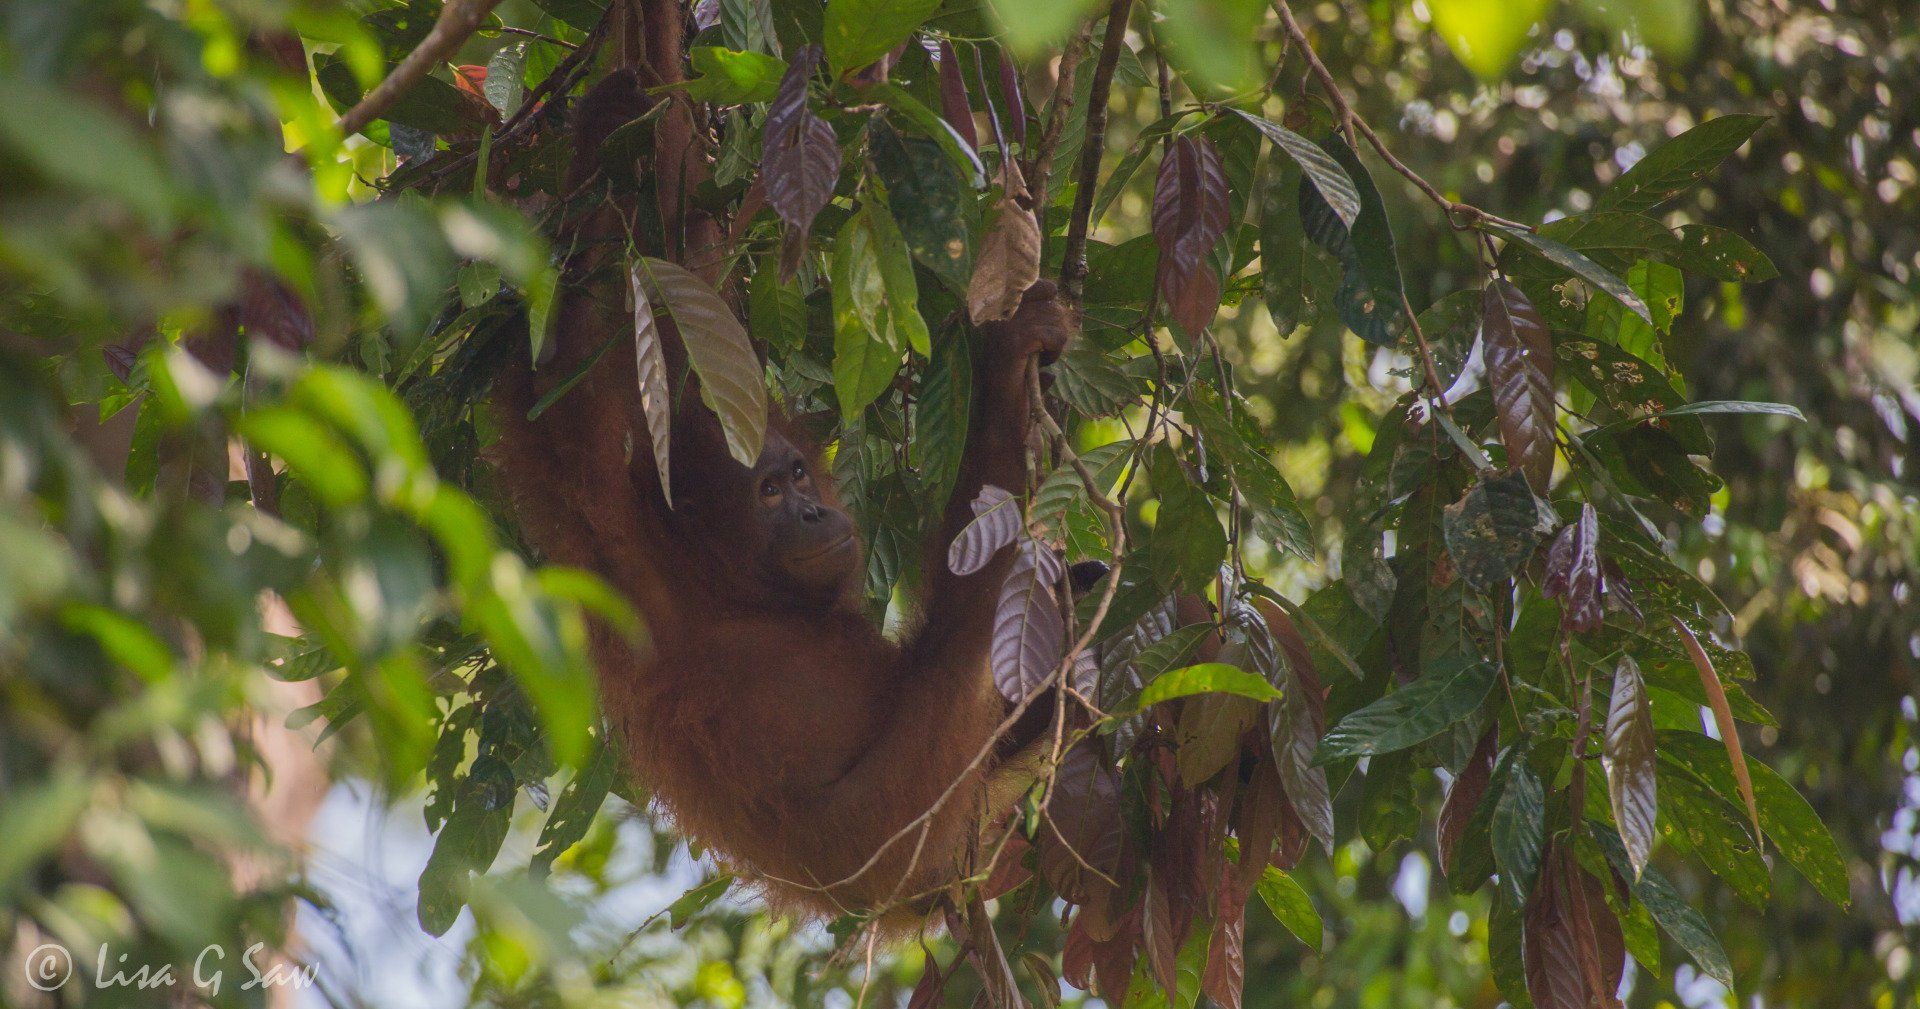 Orangutan hanging from tree surrounded by leaves at Sepilok